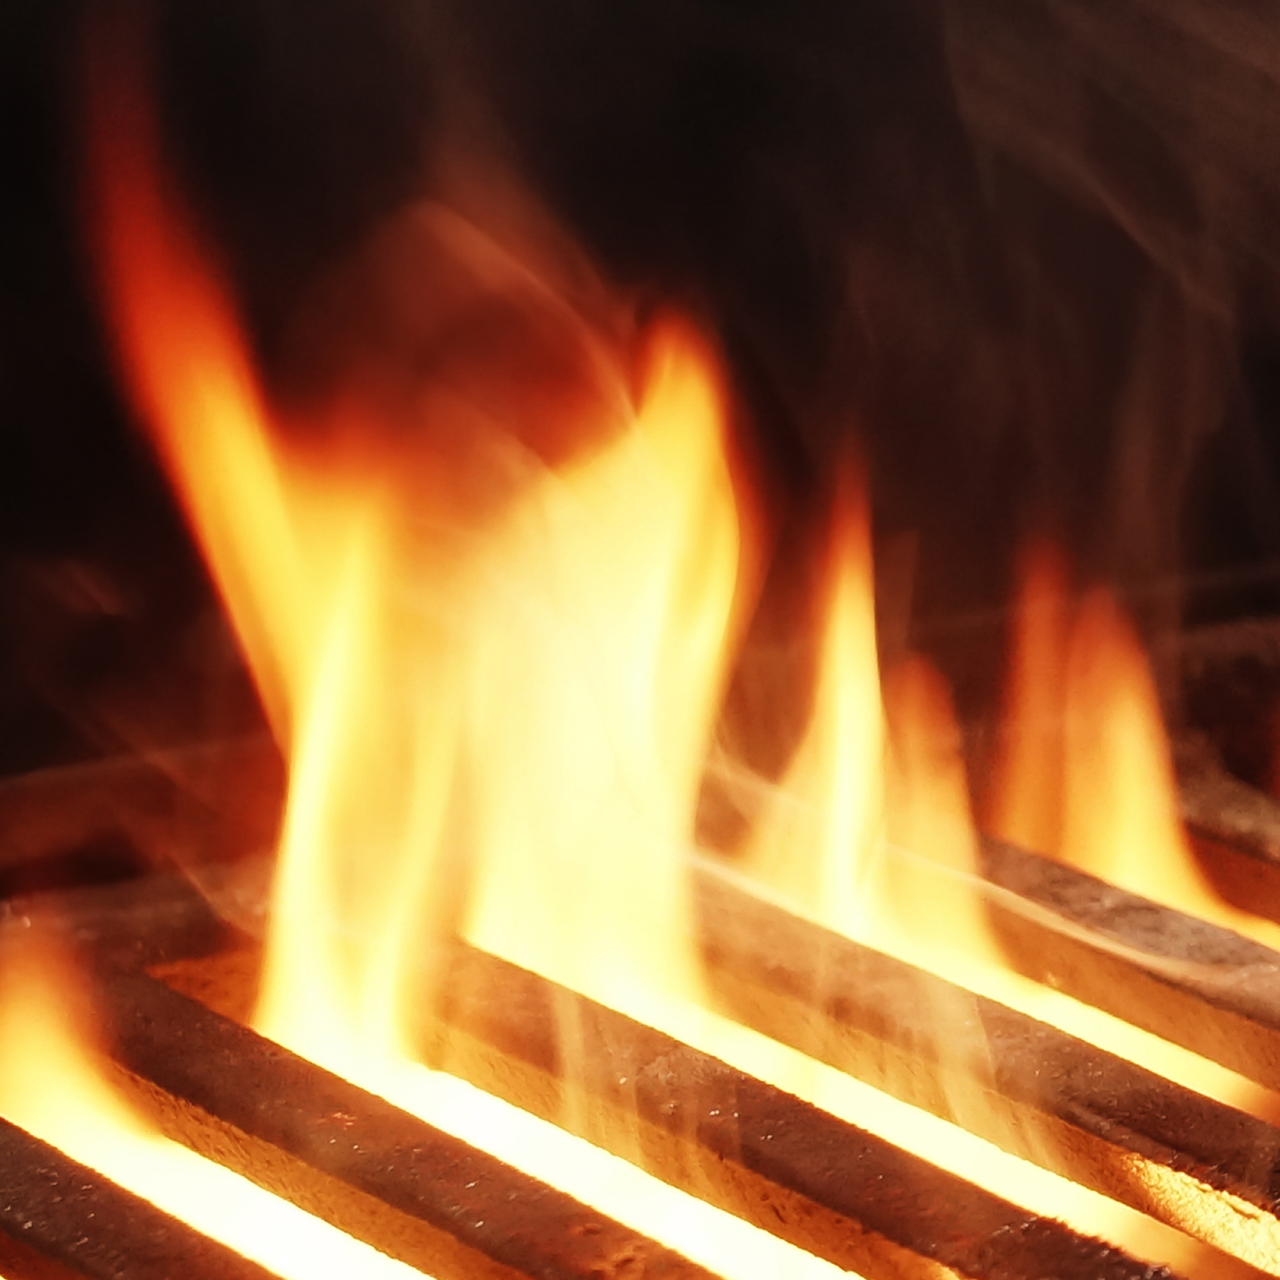 Image of flames in a grill